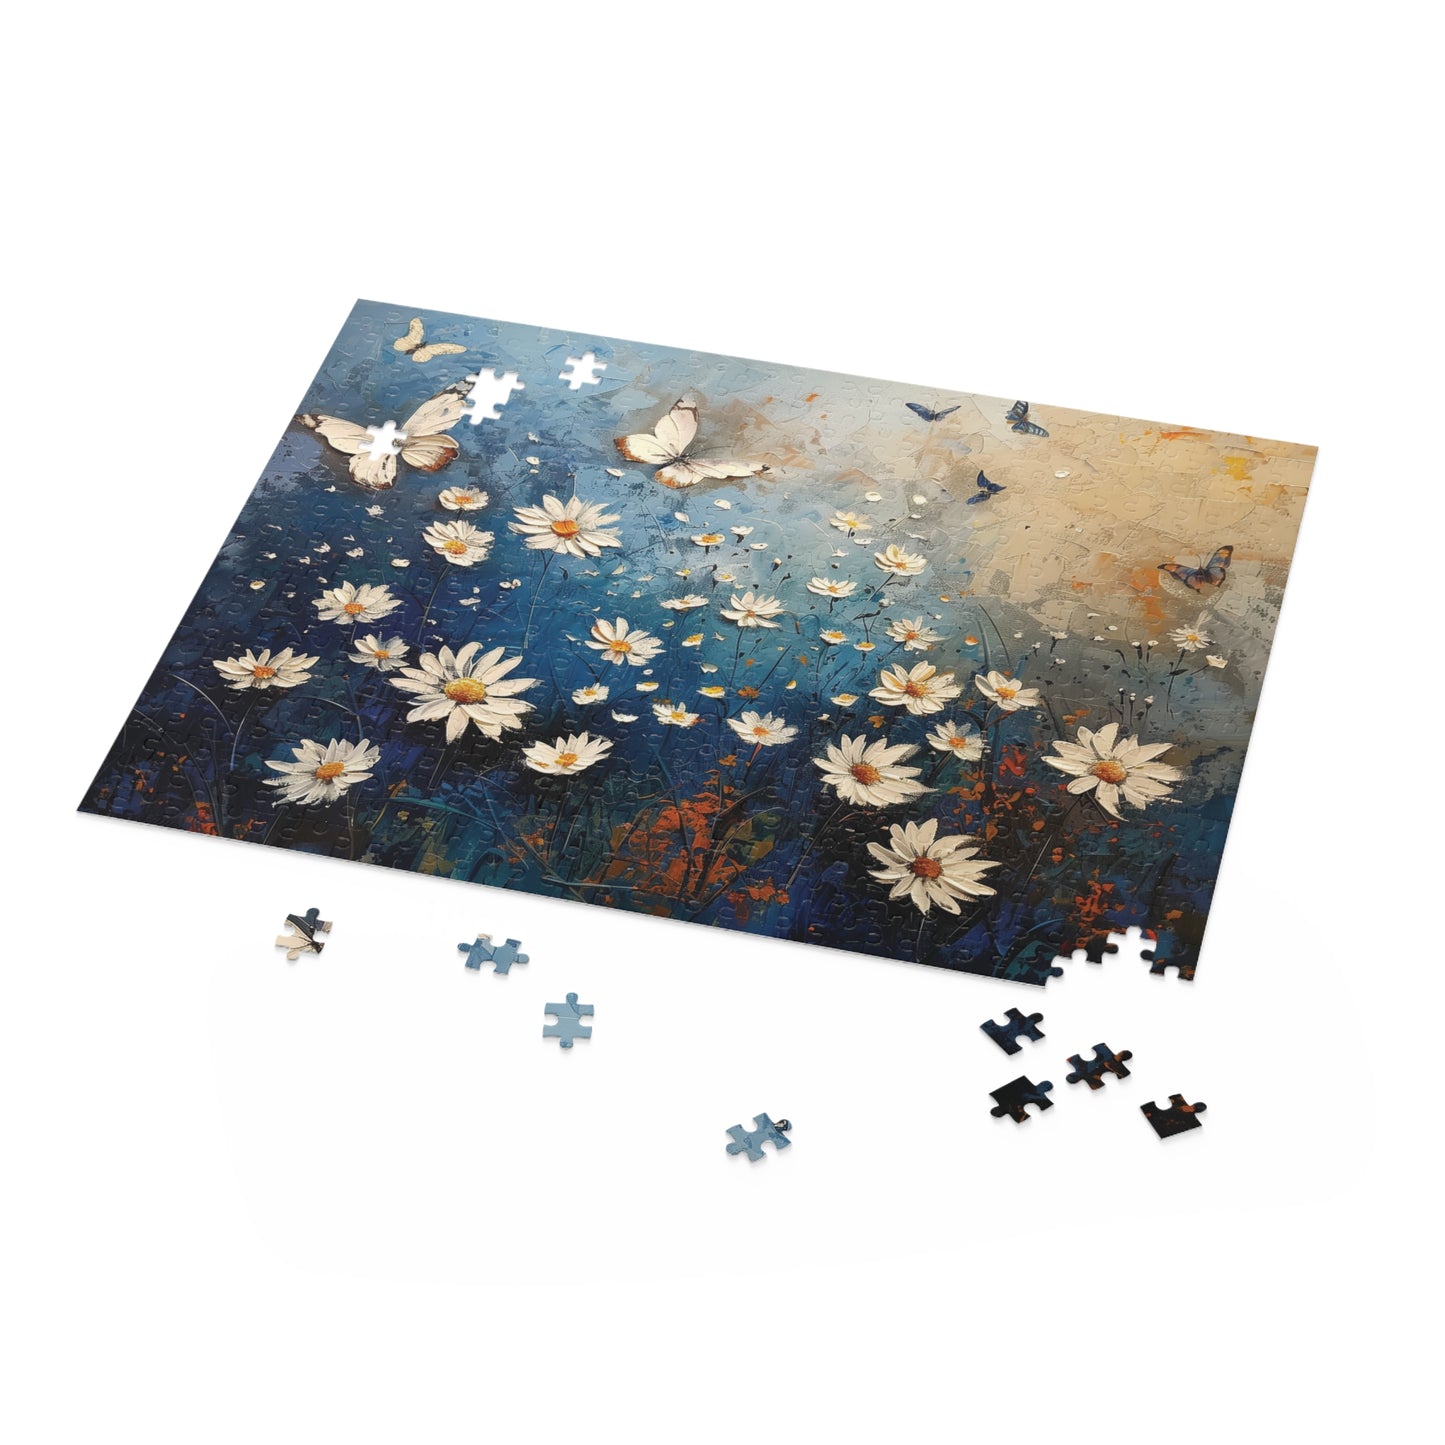 Daisy Flower Puzzle, Butterfly Jigsaw Puzzle, Beautiful Painting Puzzle, Artistic Puzzle, 120 pieces, 252 pieces, 500 pieces, Family Game